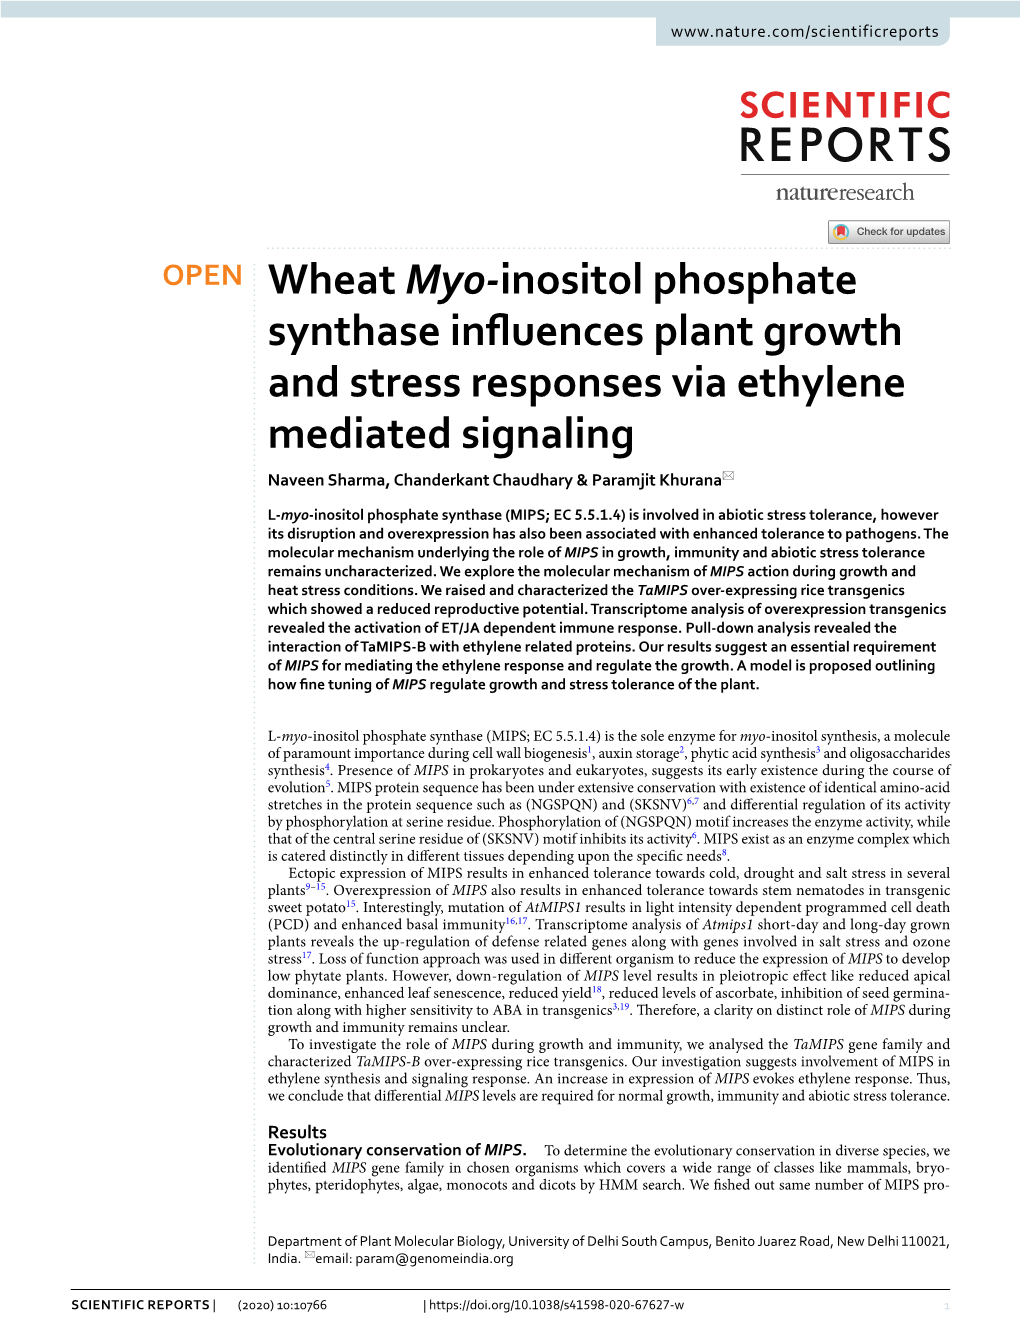 Wheat Myo-Inositol Phosphate Synthase Influences Plant Growth